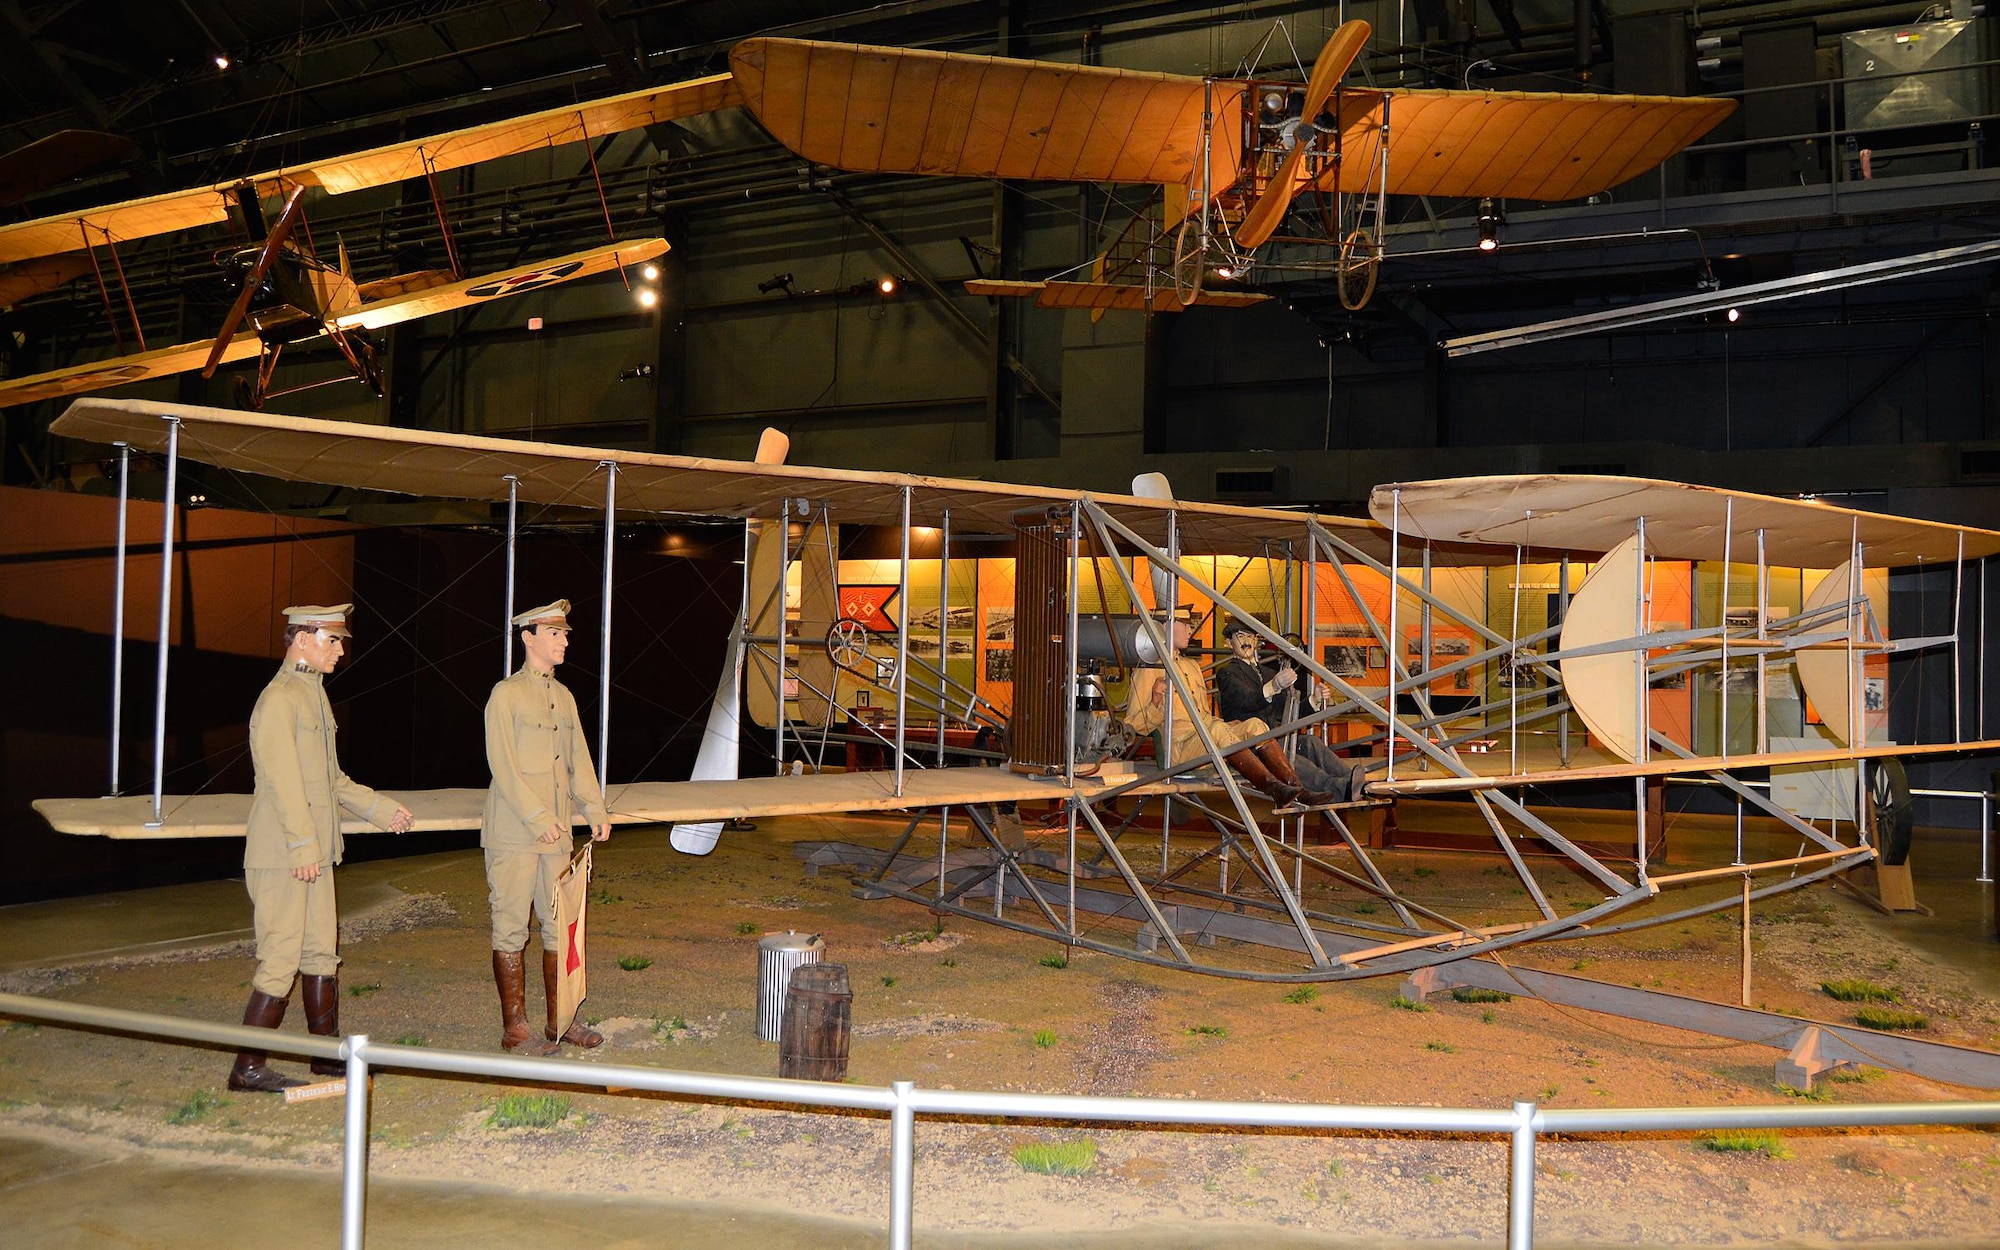 Wright 1909 Military Flyer in the Early Years Gallery at the National Museum of the United States Air Force. (U.S. Air Force photo by Ken LaRock)